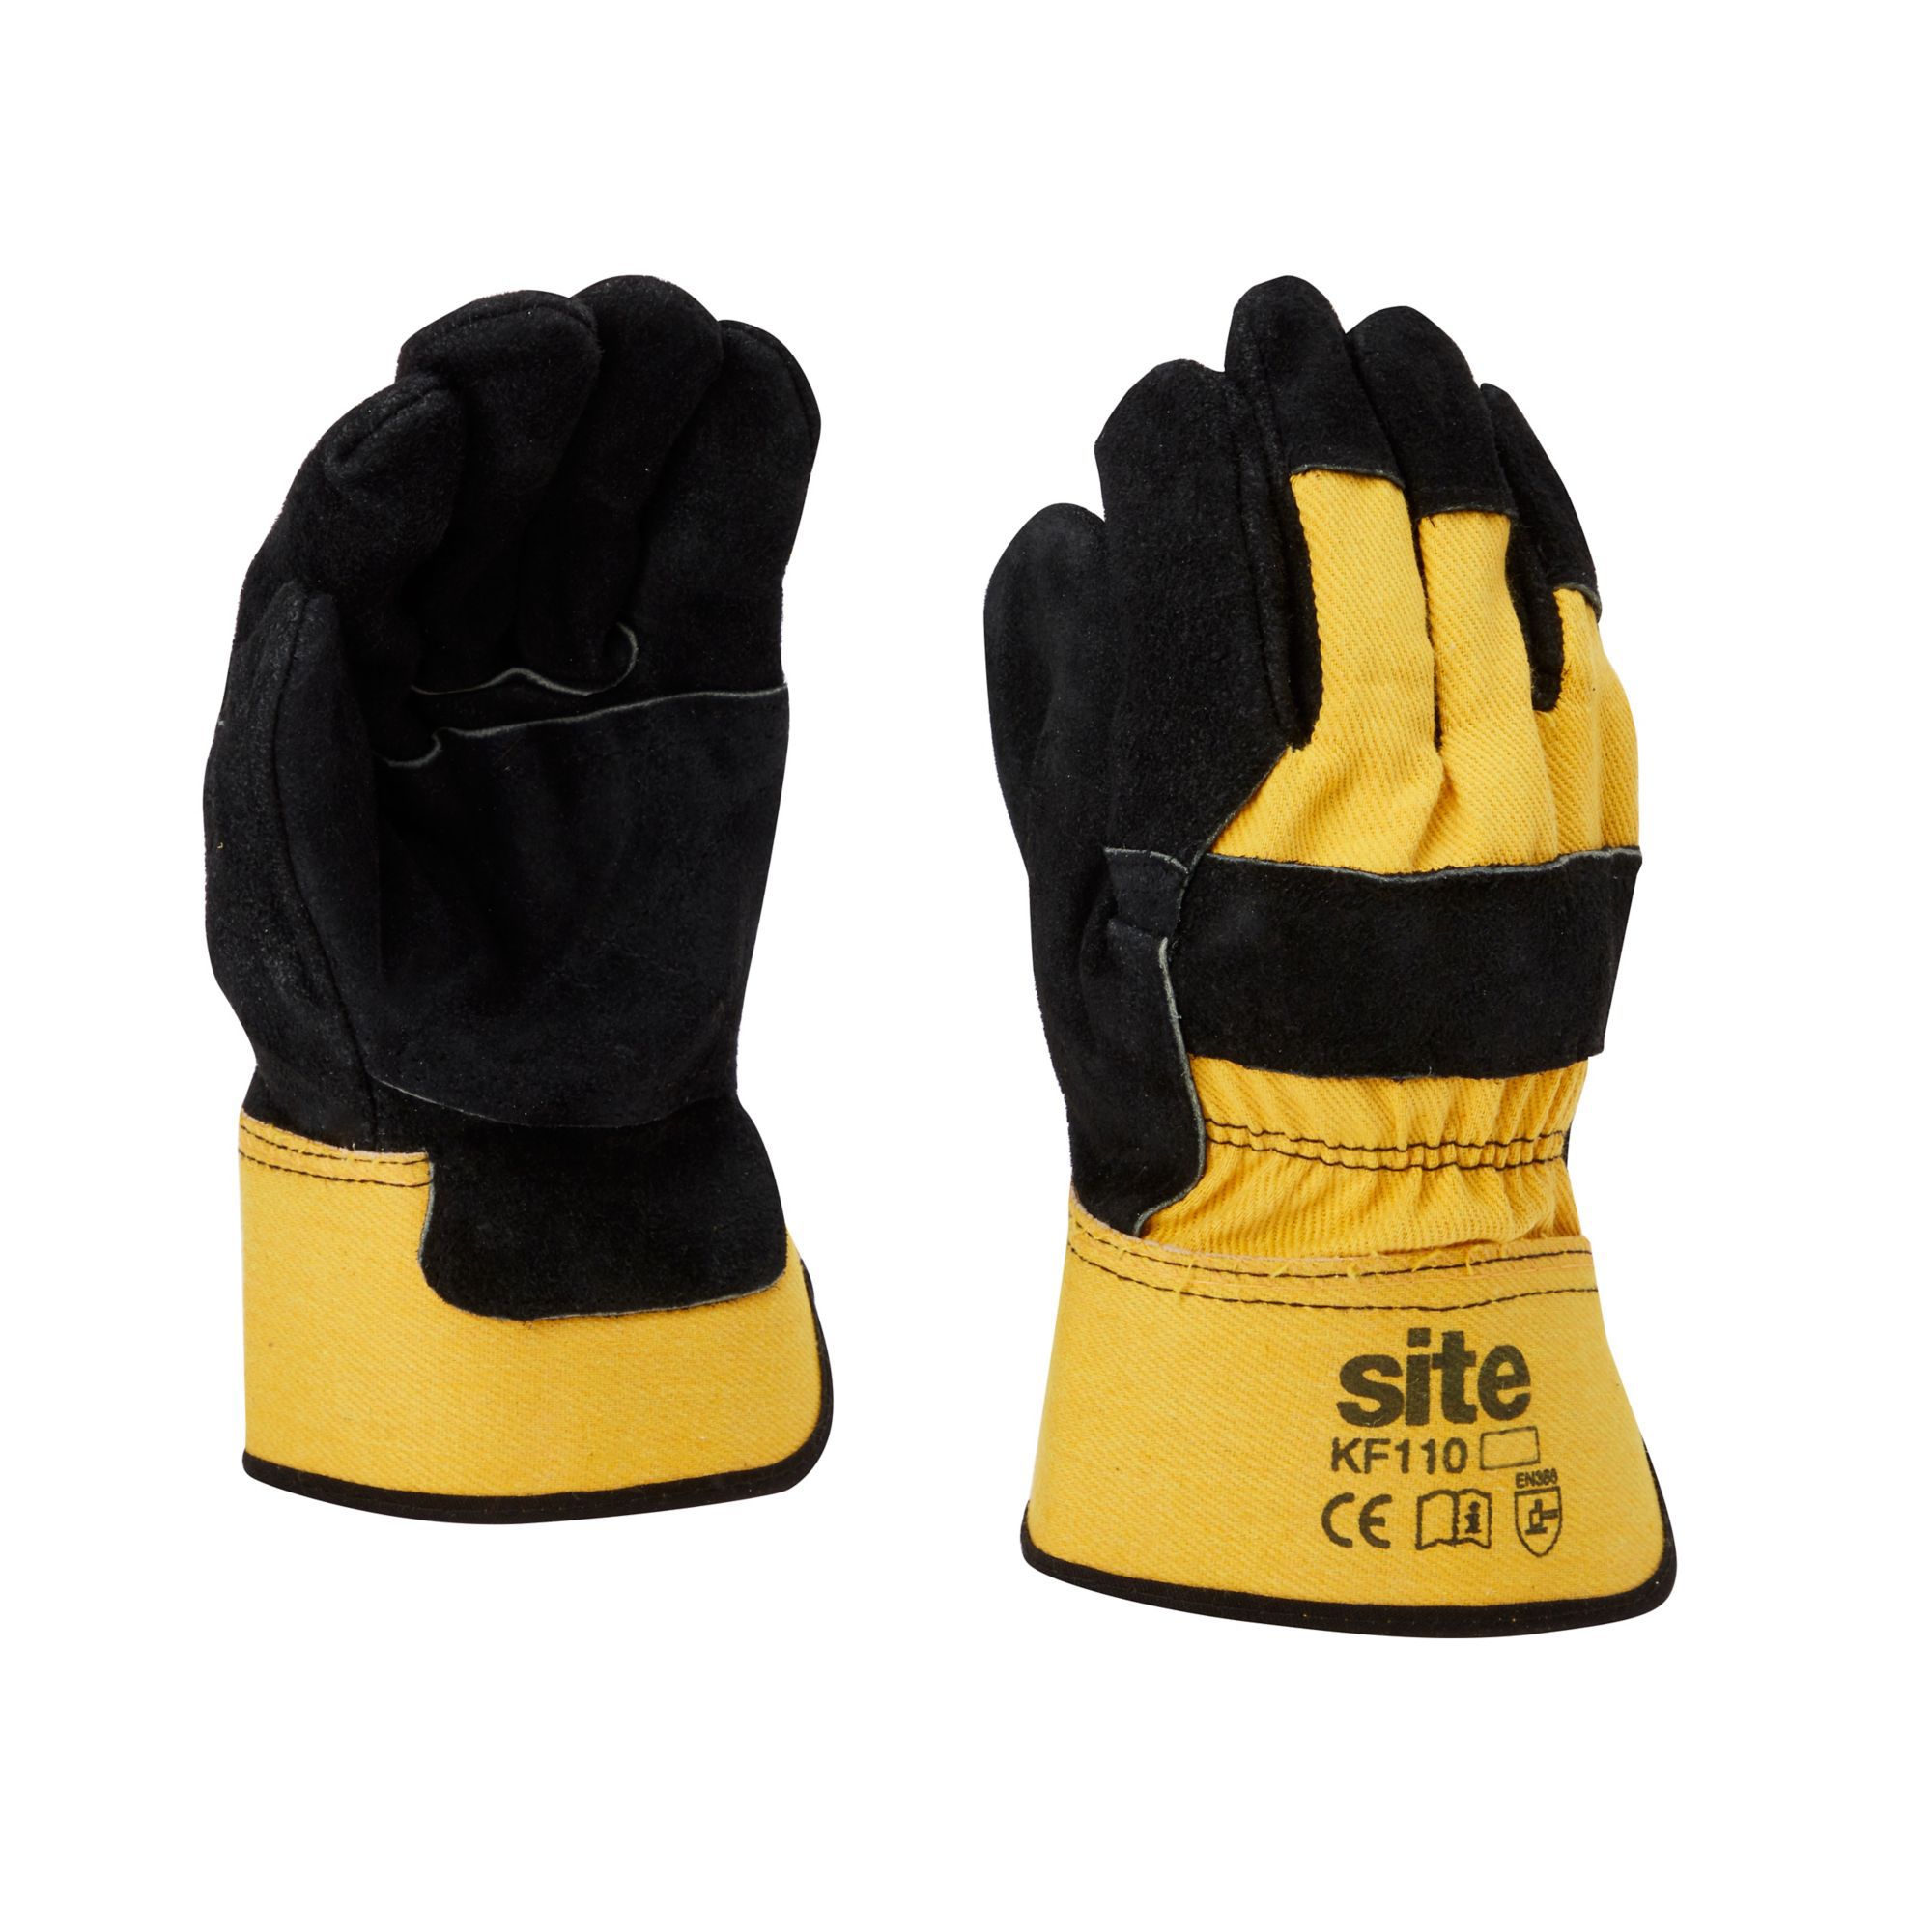 Site Cotton & leather Gloves, Large